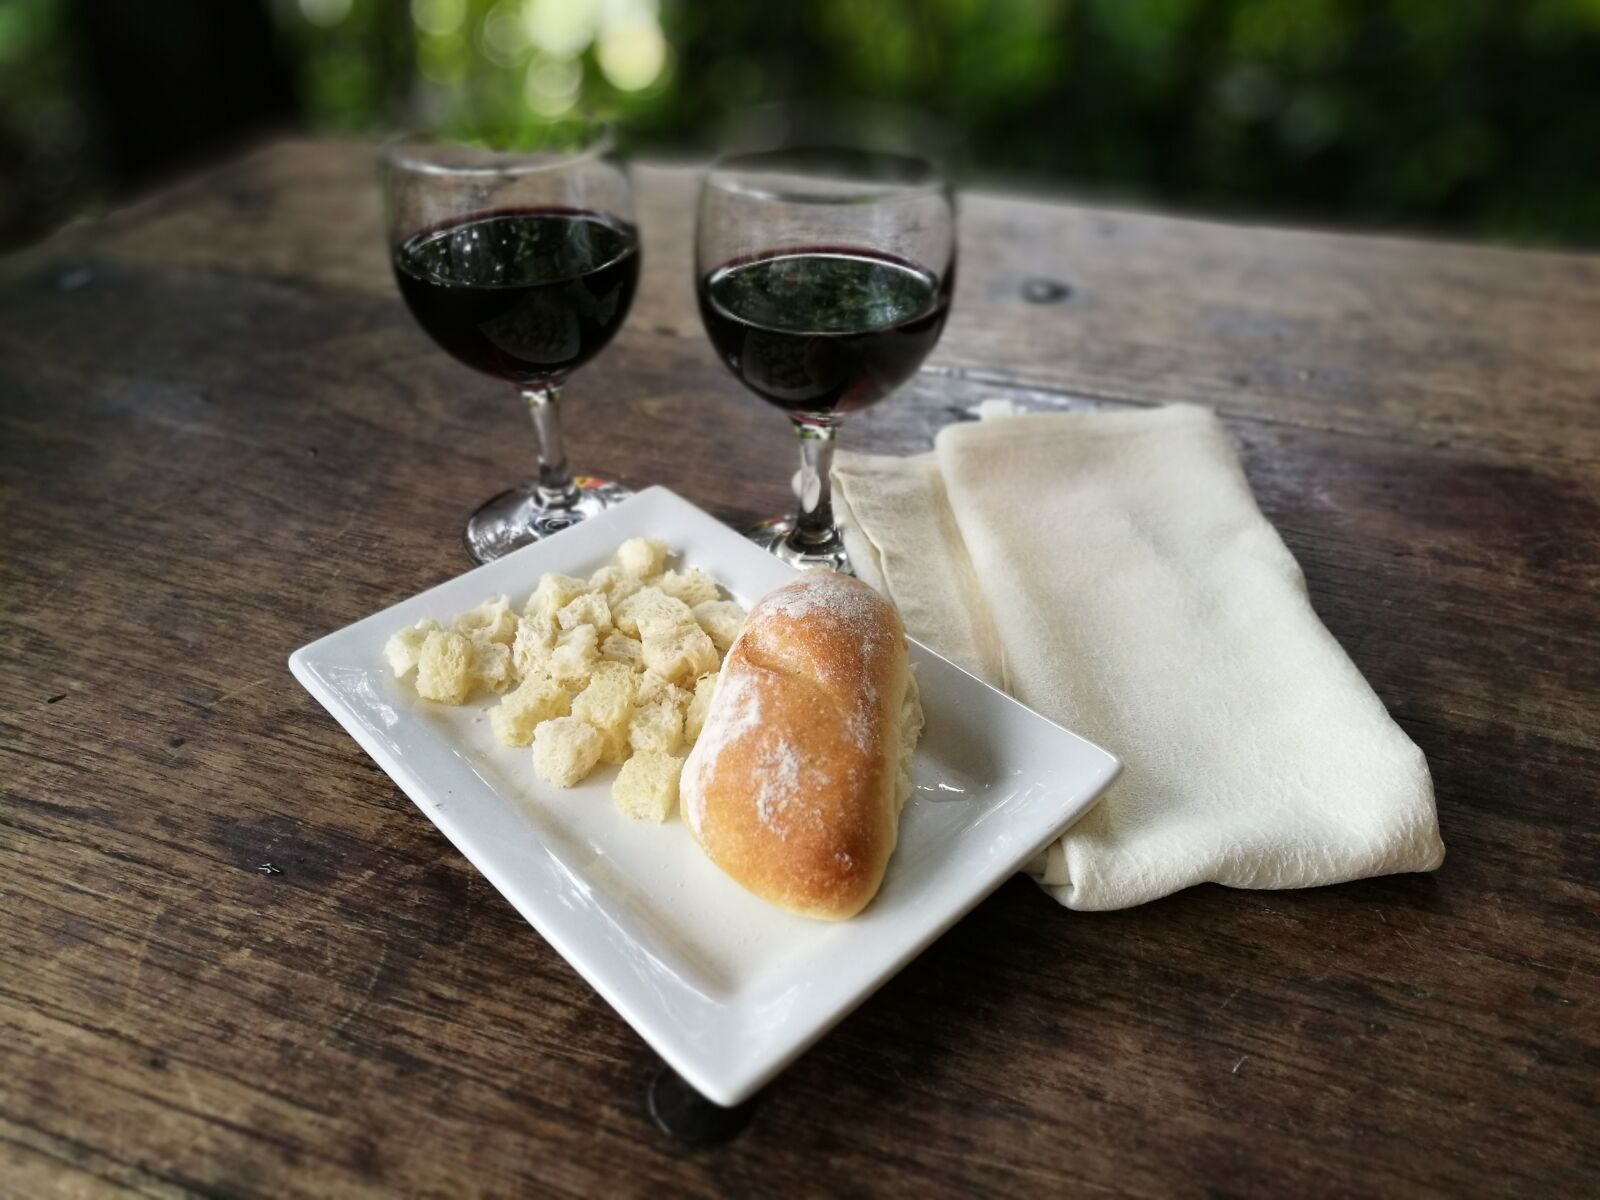 HUAWEI P9 sample photo. Bread, napkin, red, wine photography